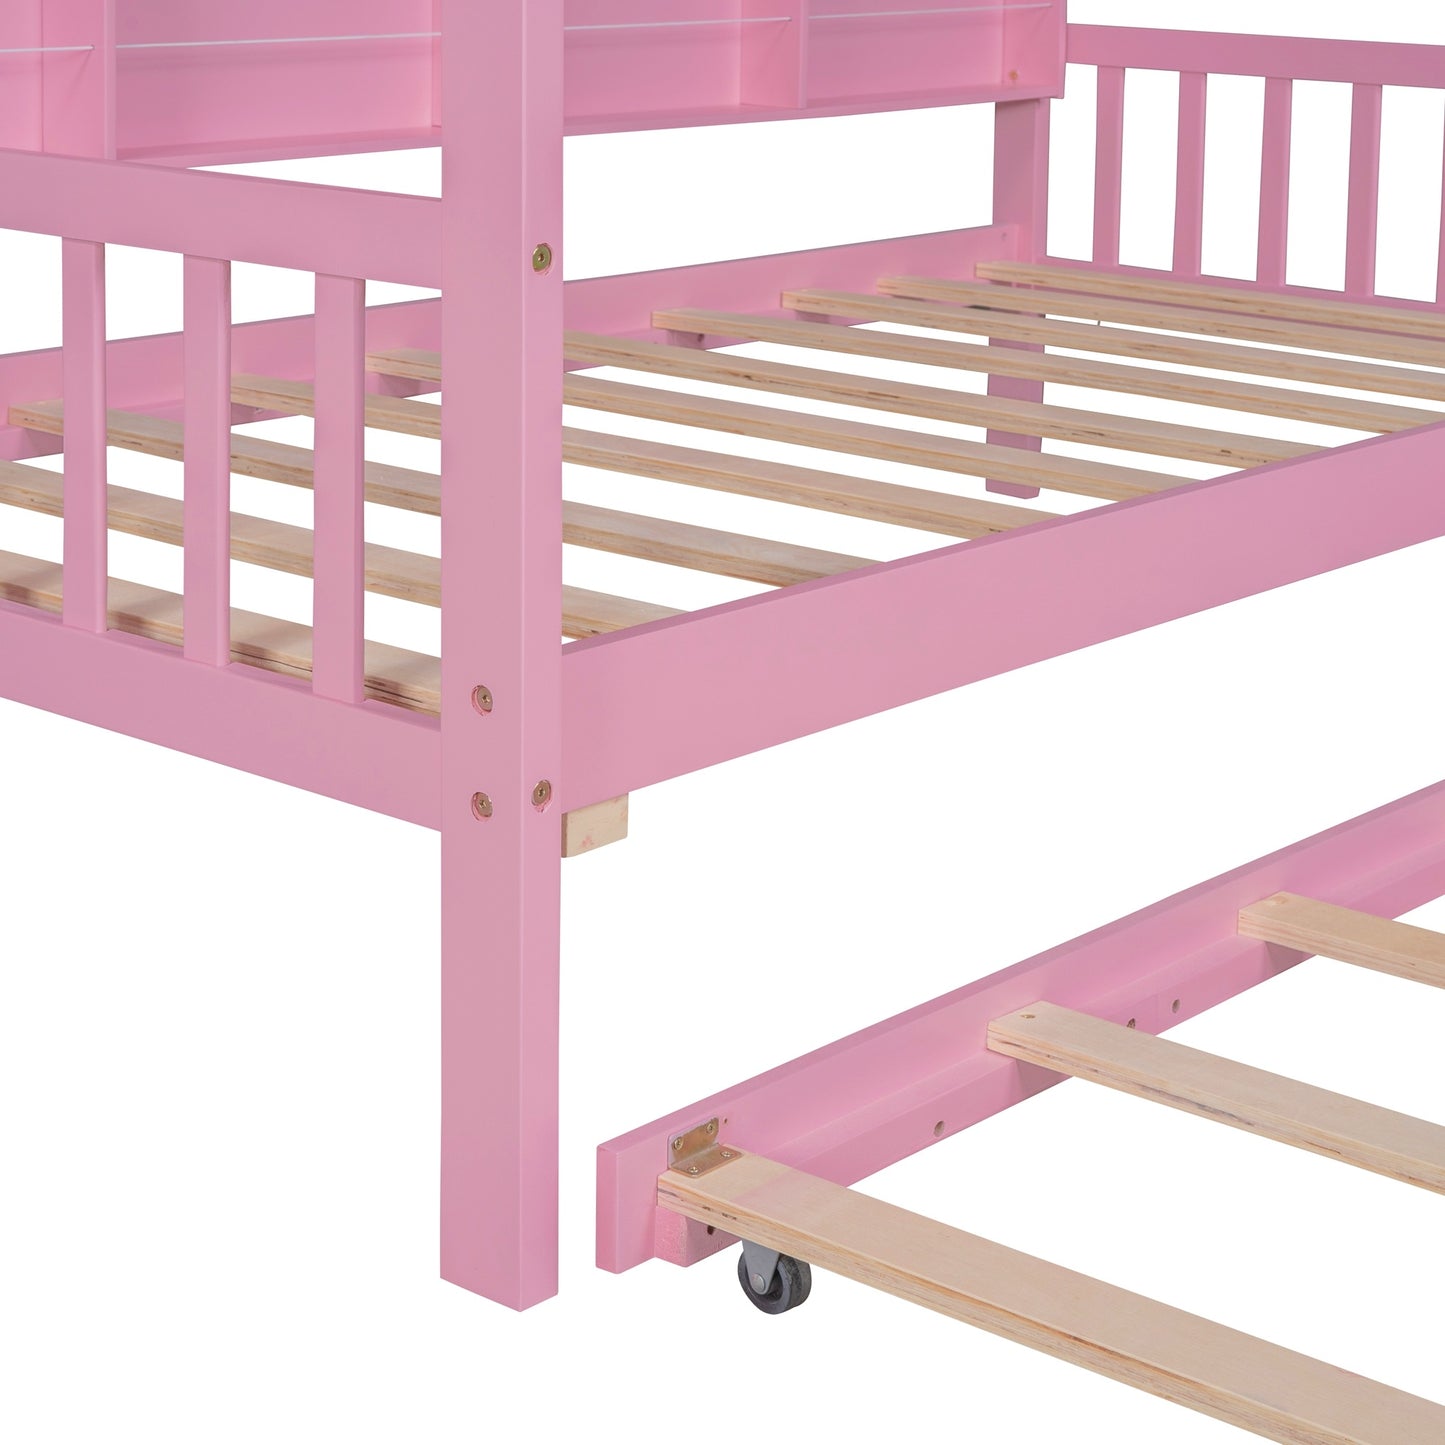 wooden house bed with trundle, pink